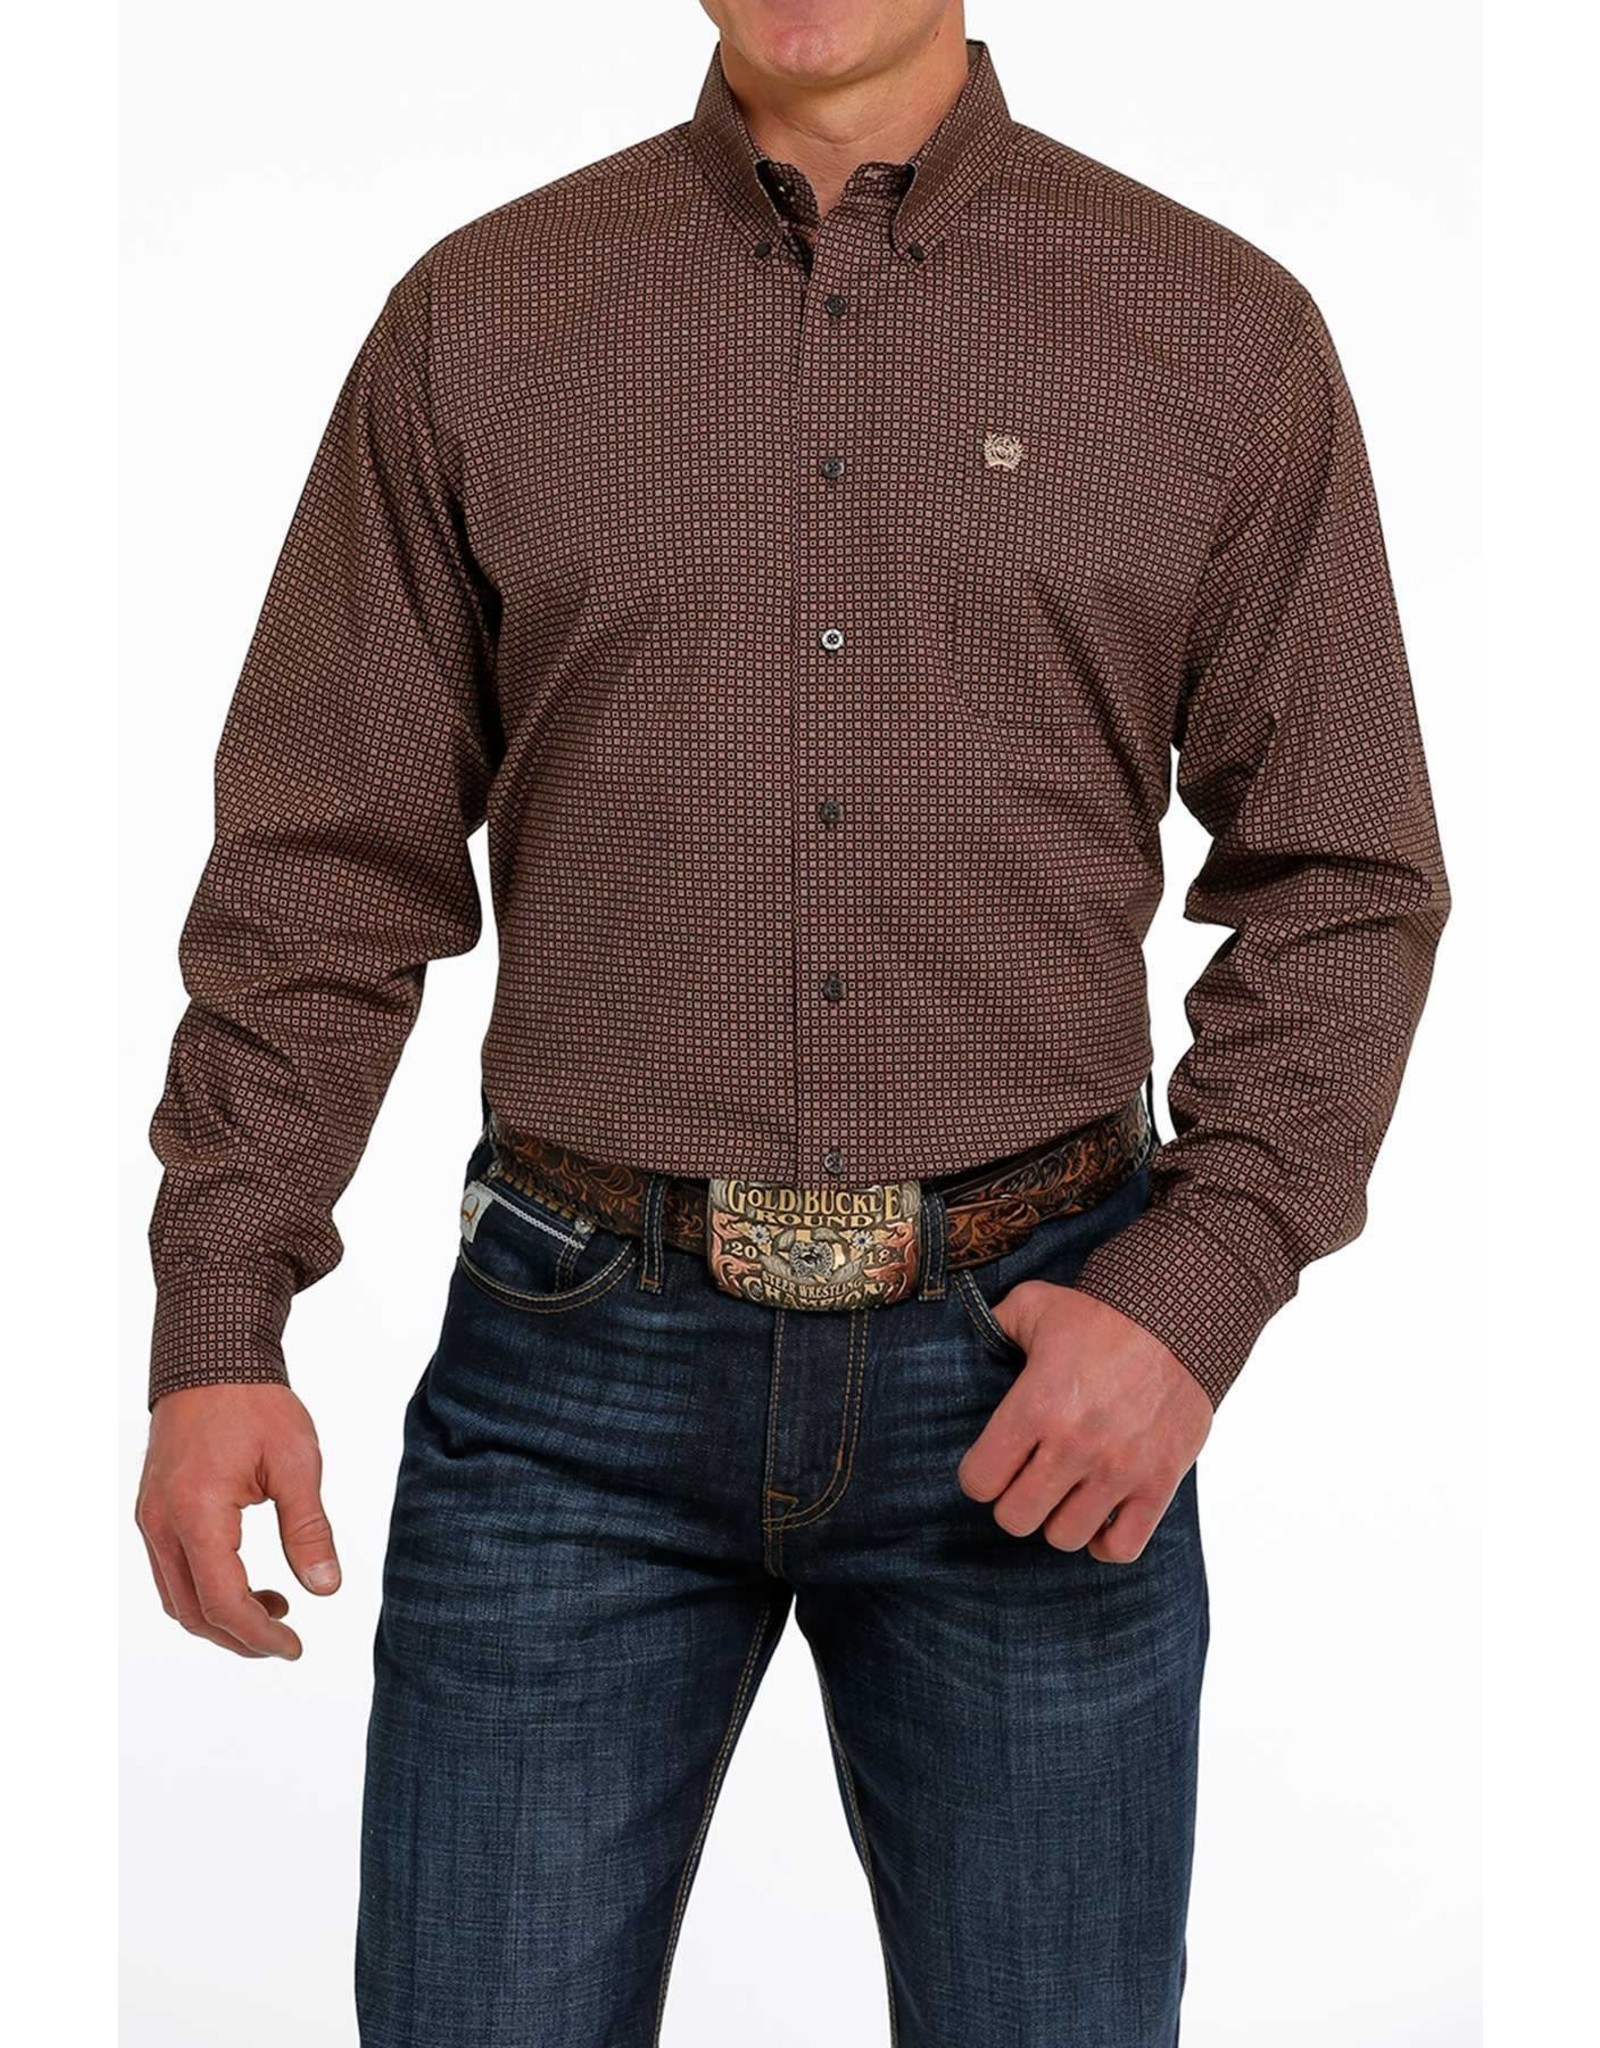 Cinch Men's Classic Fit Stretch Chocolate Geo Print MTW1105492 Western Button Up Shirt